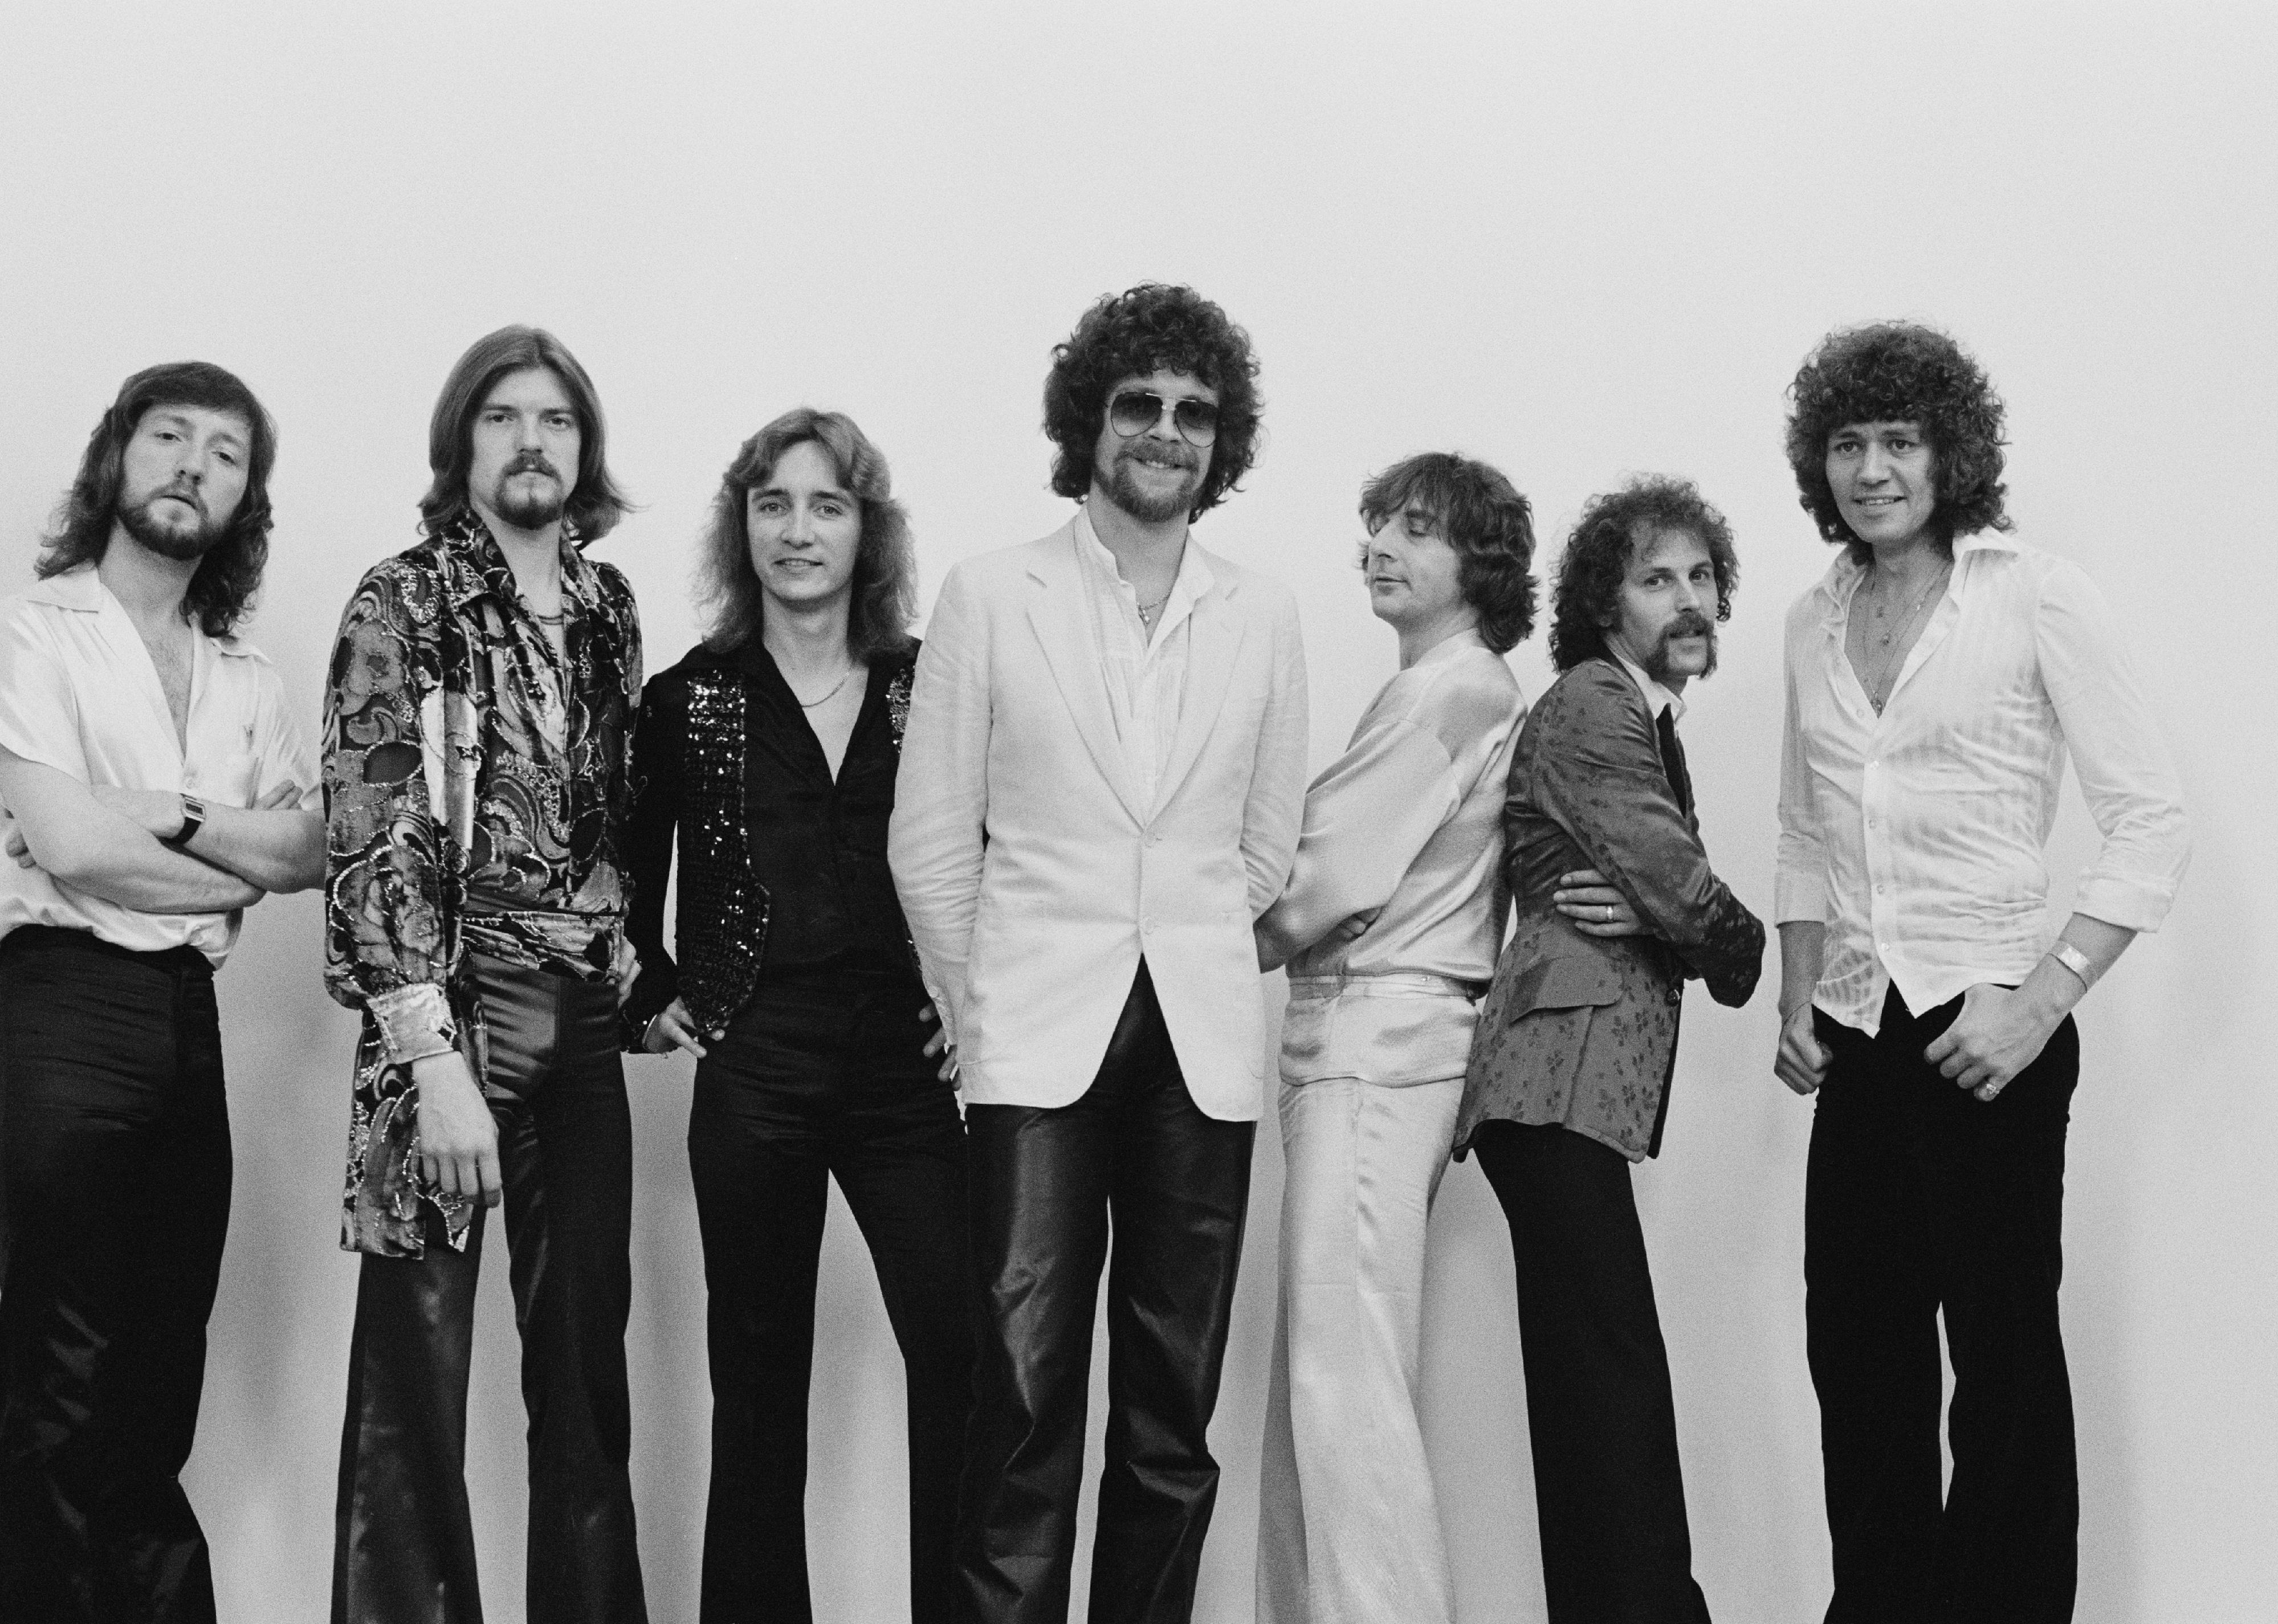 Electric Light Orchestra posed on the set of a video shoot.